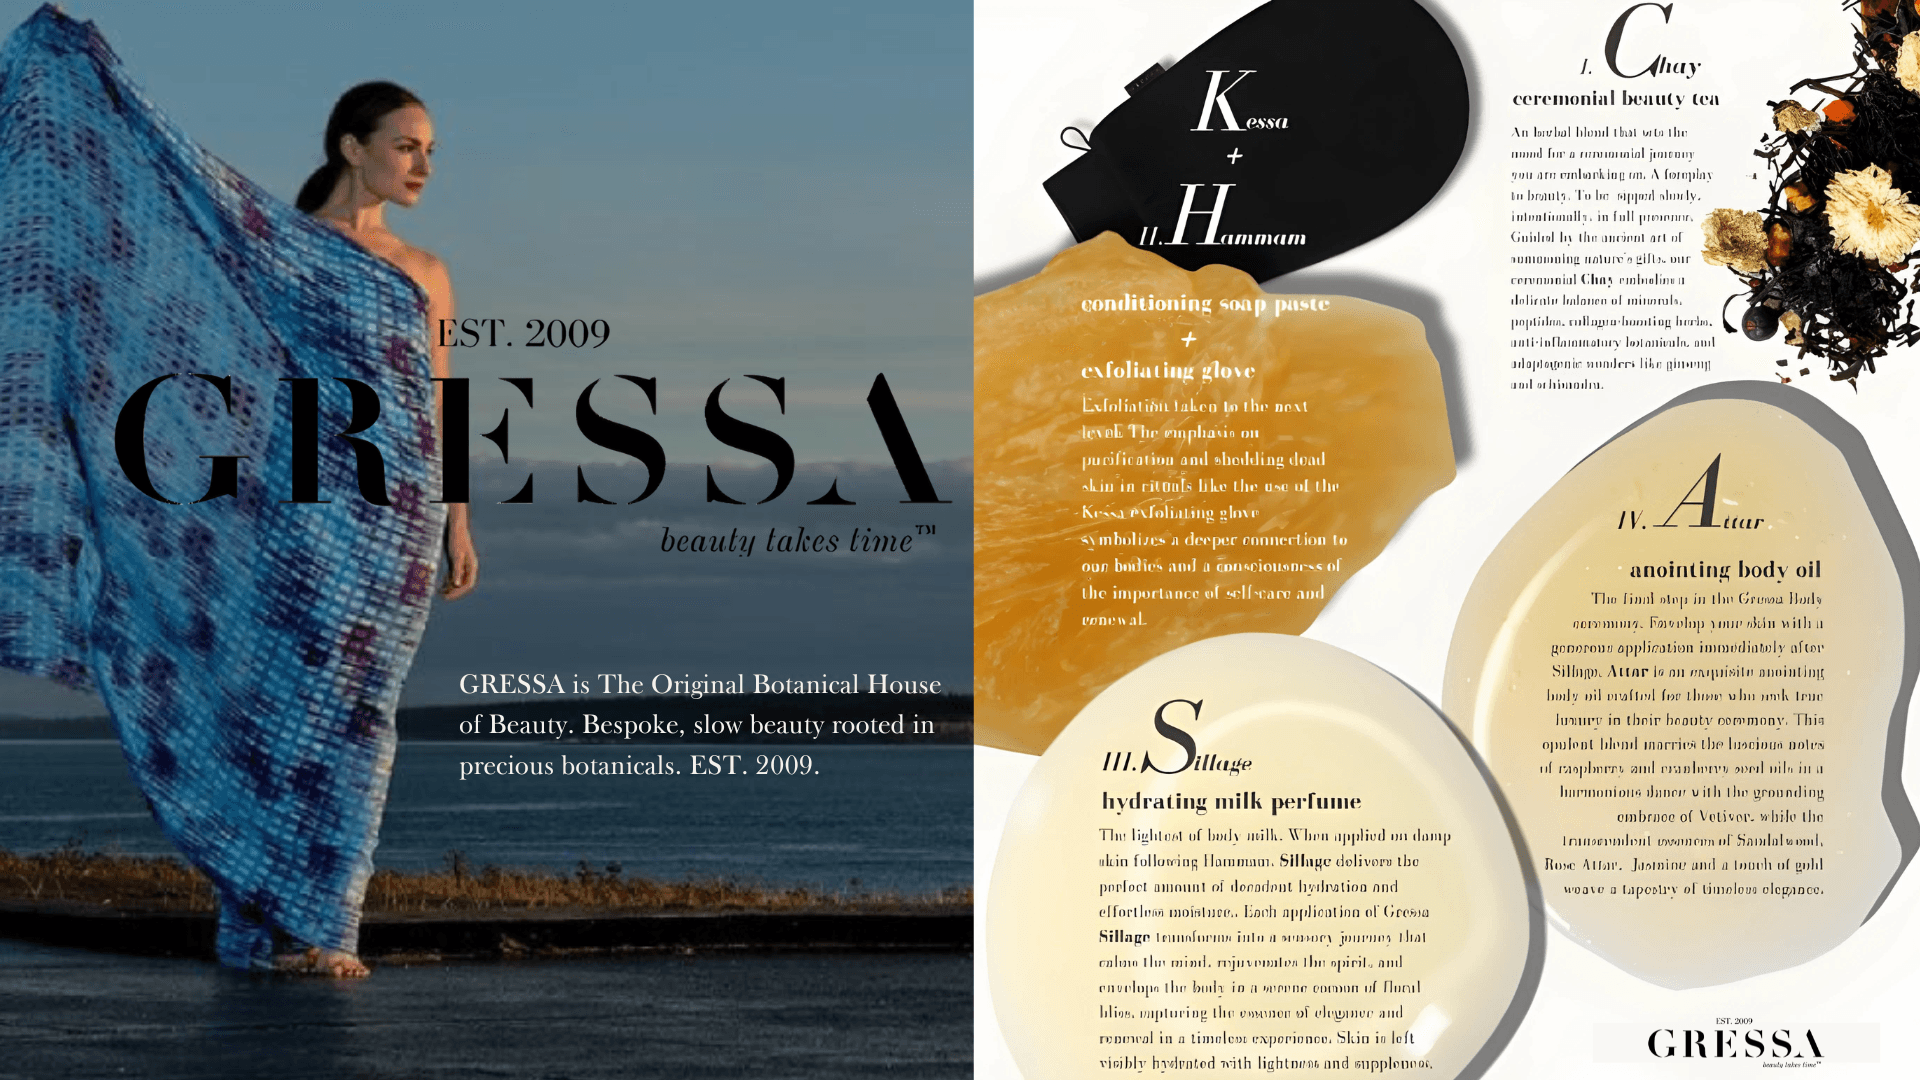 Gressa Celebrates 15 Years with Launch of the Art of Bathing Ritual Line